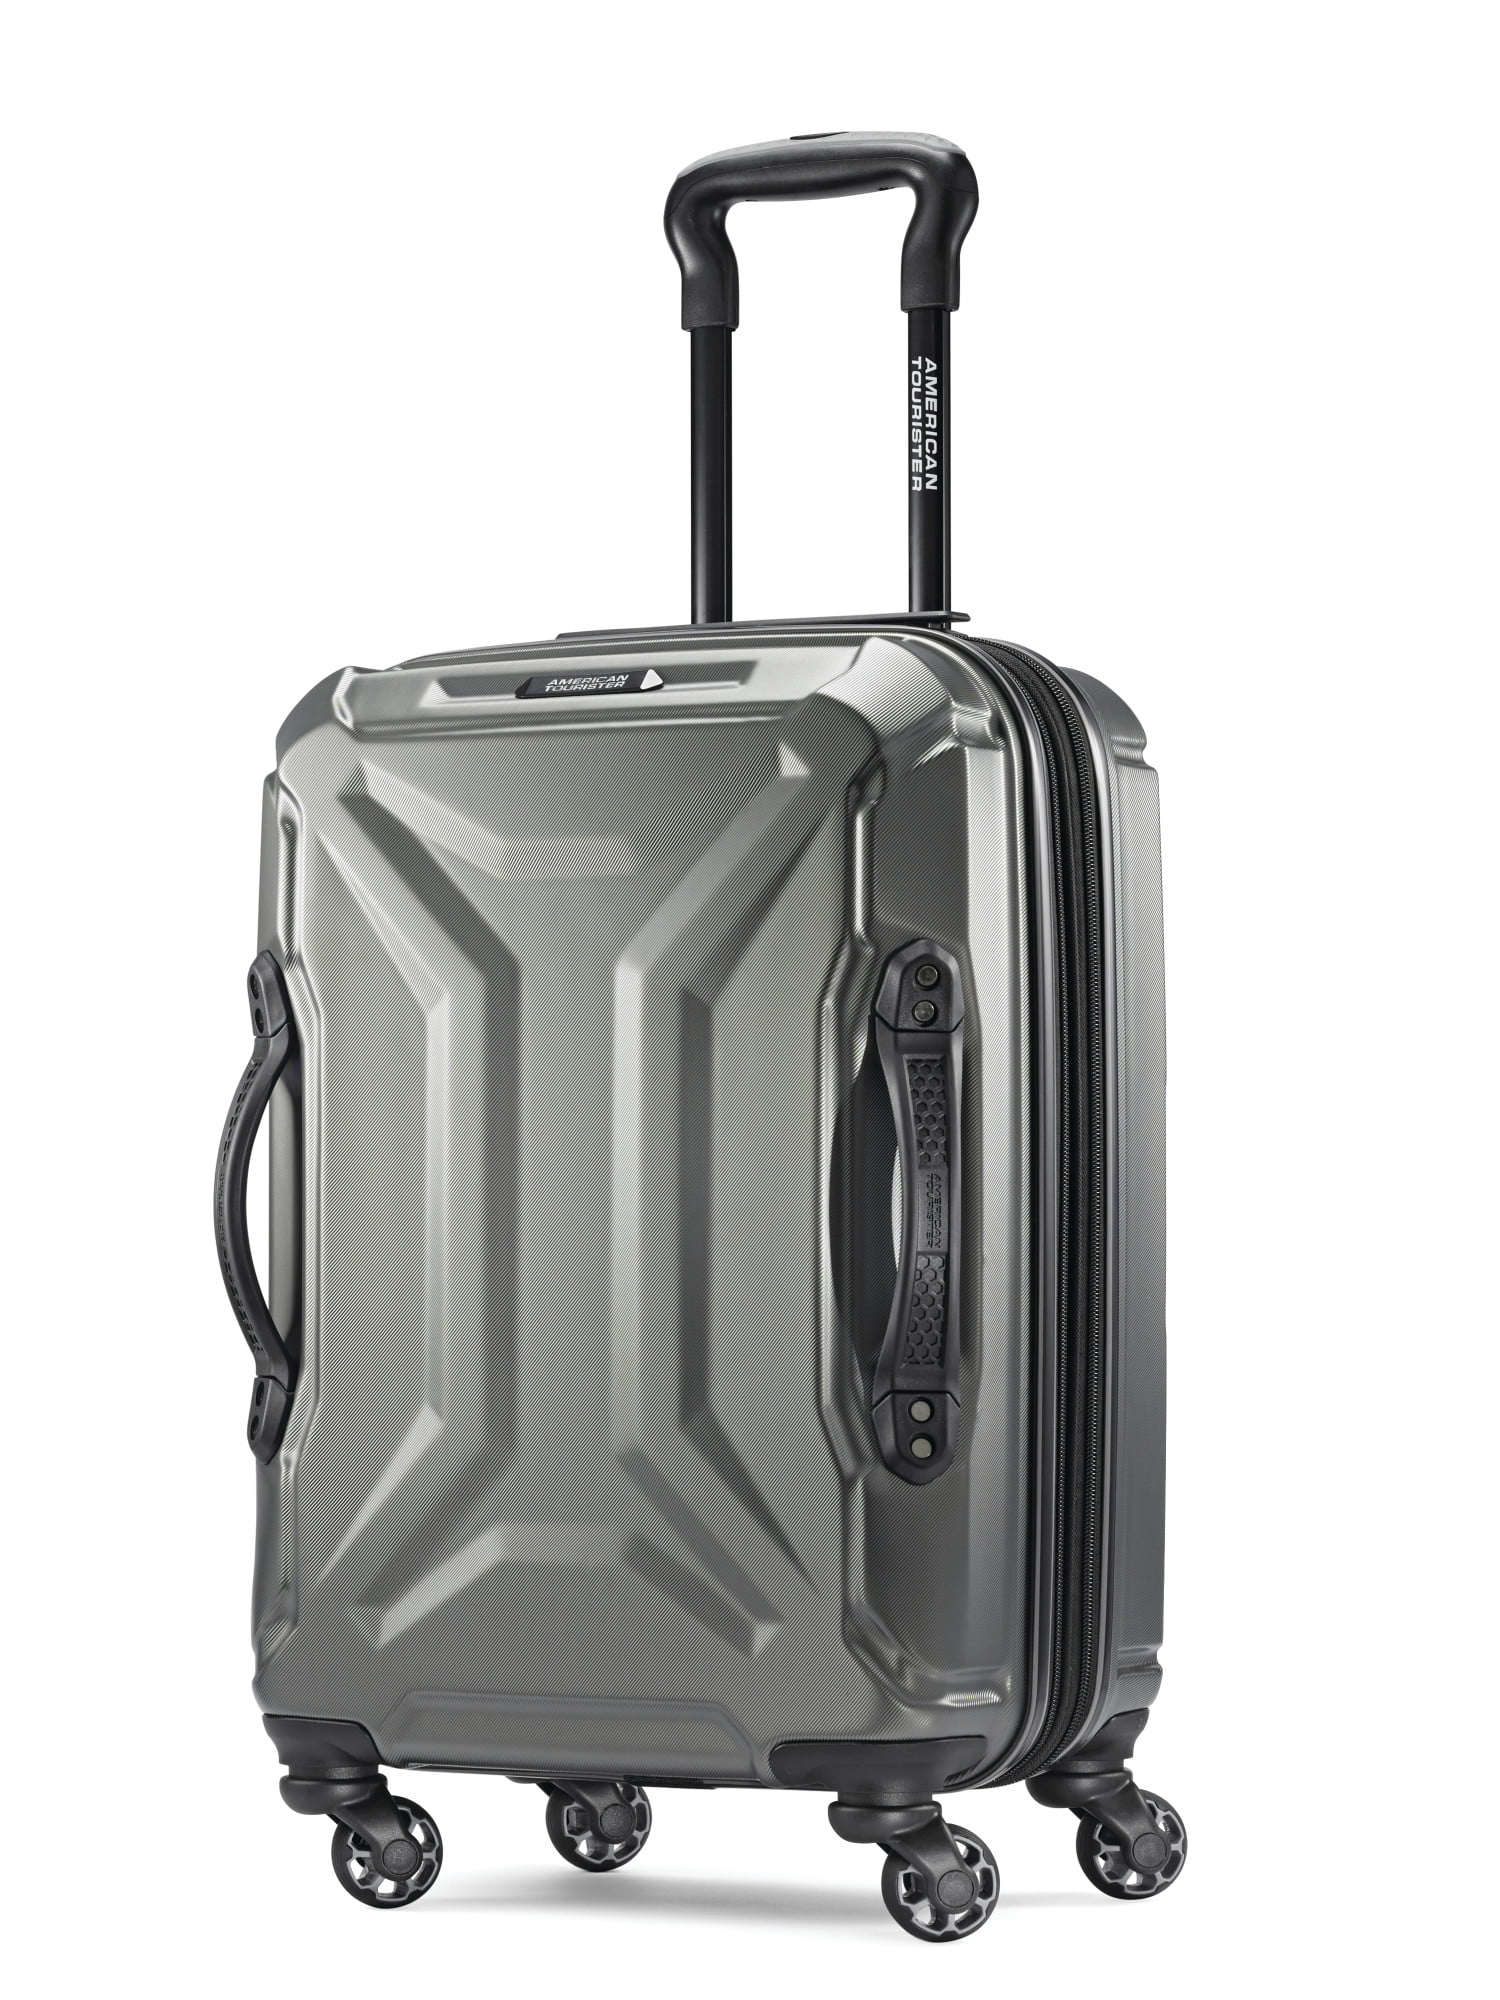 American Tourister Cargo Max 21" Hardside Carry-on Spinner Luggage Single Piece - Olive